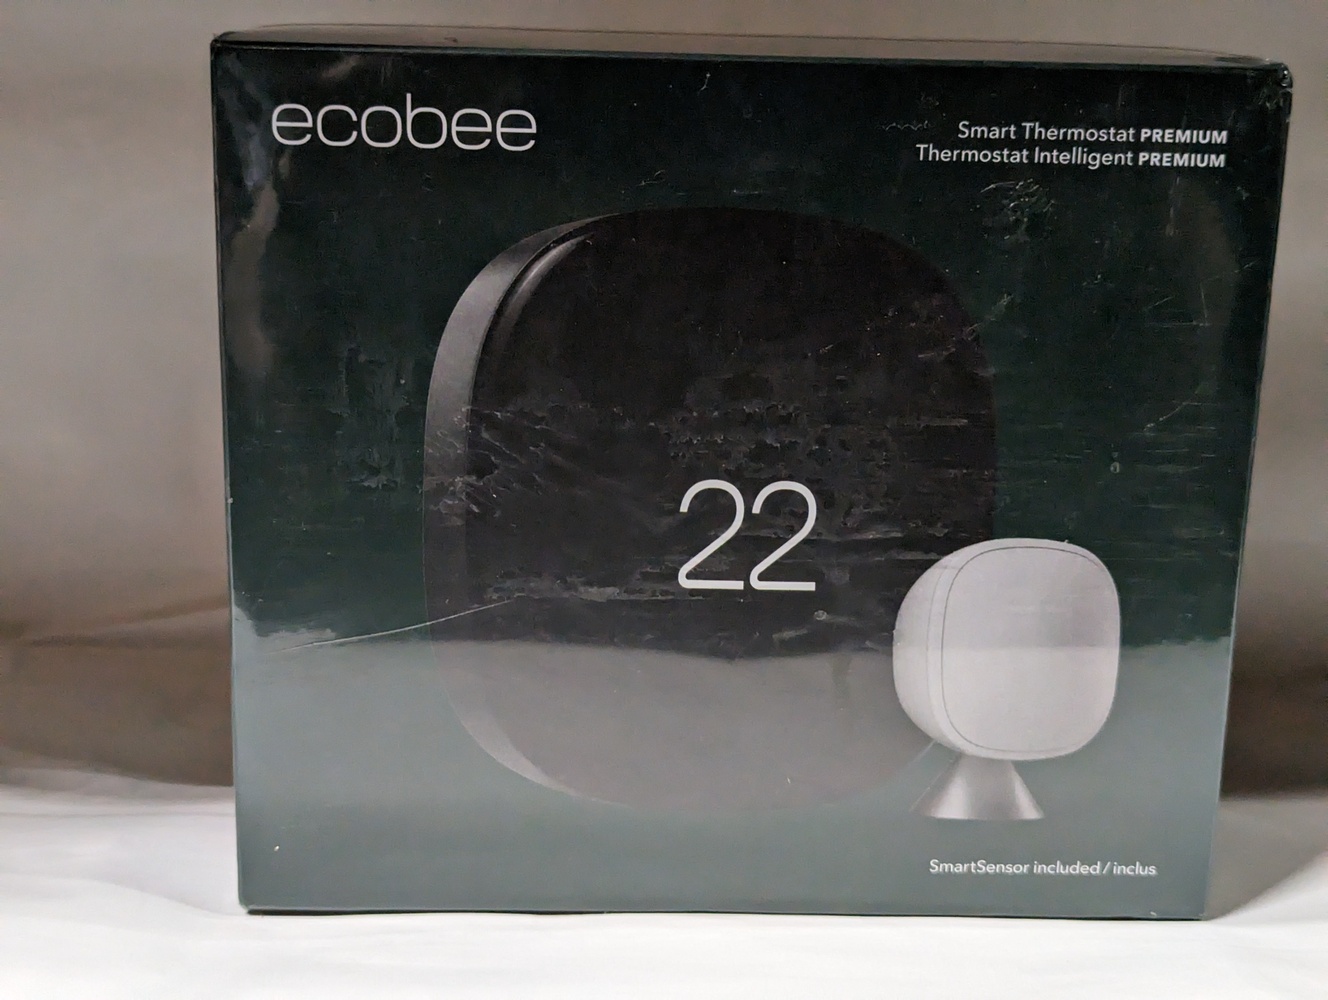 Ecobee Smart Thermostat Premium Thermostat and Room Sensor (Wi-Fi Compatible)